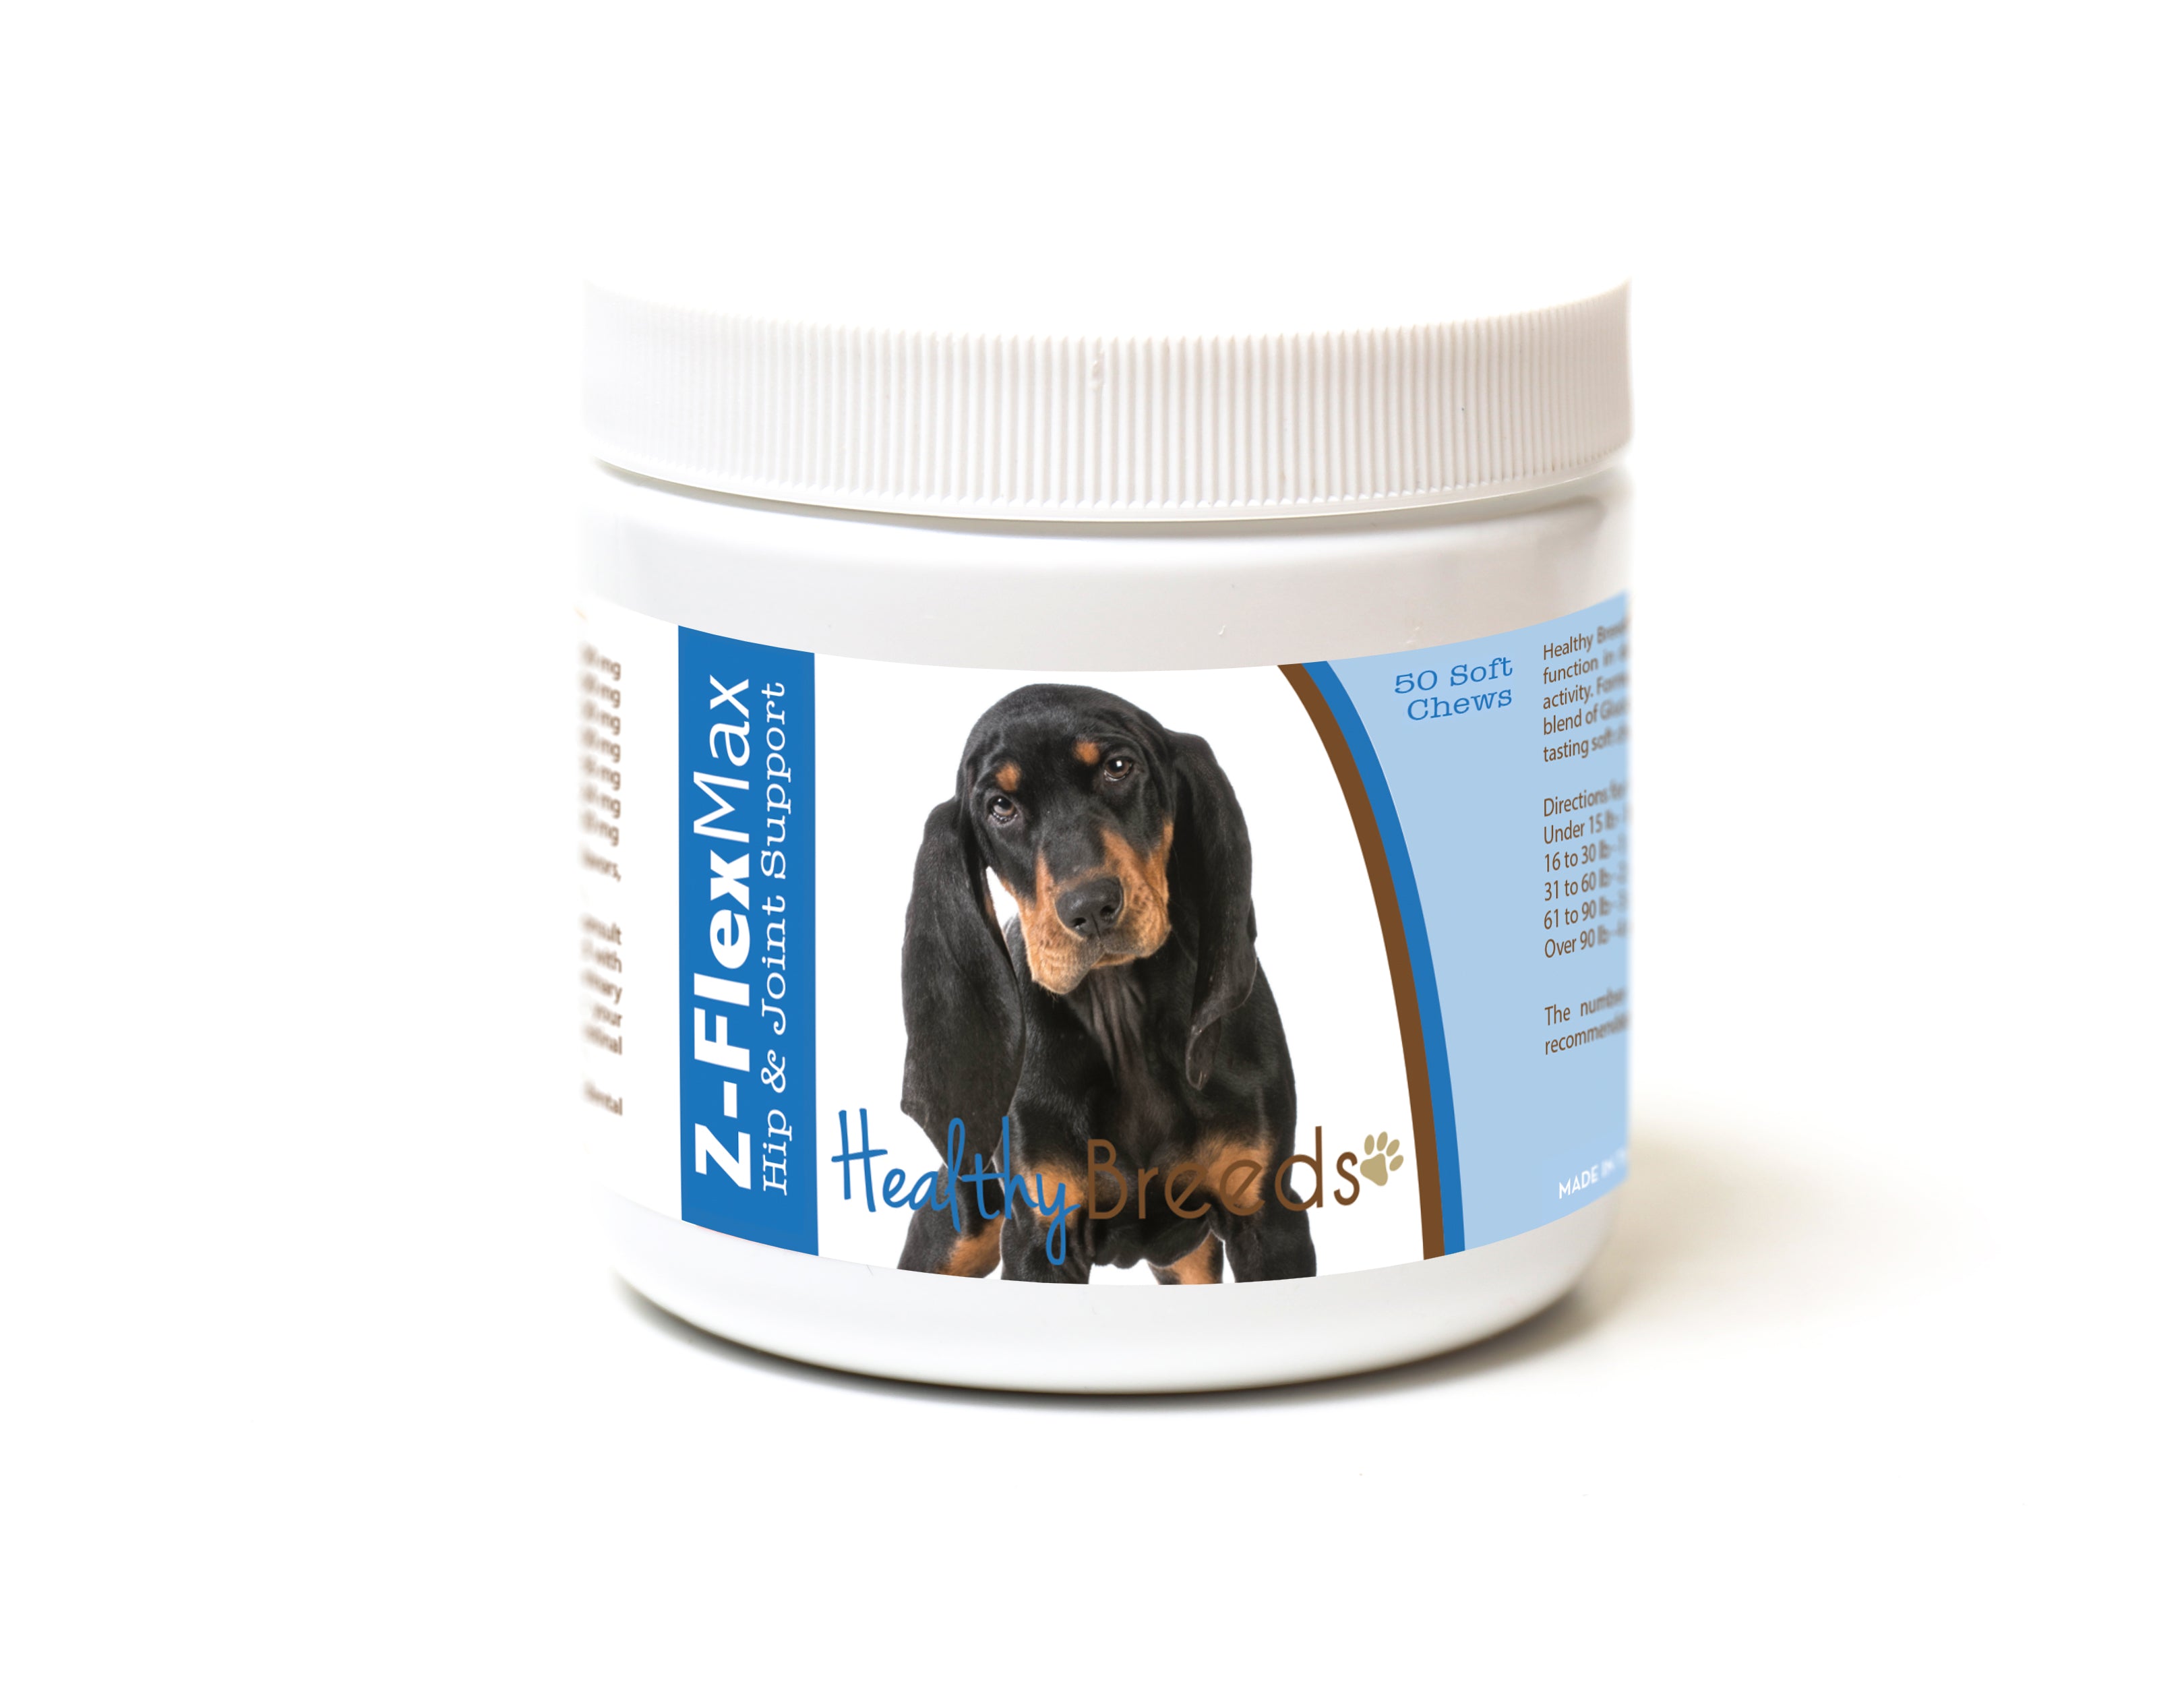 Black and Tan Coonhound Z-Flex Max Hip and Joint Soft Chews 50 Count